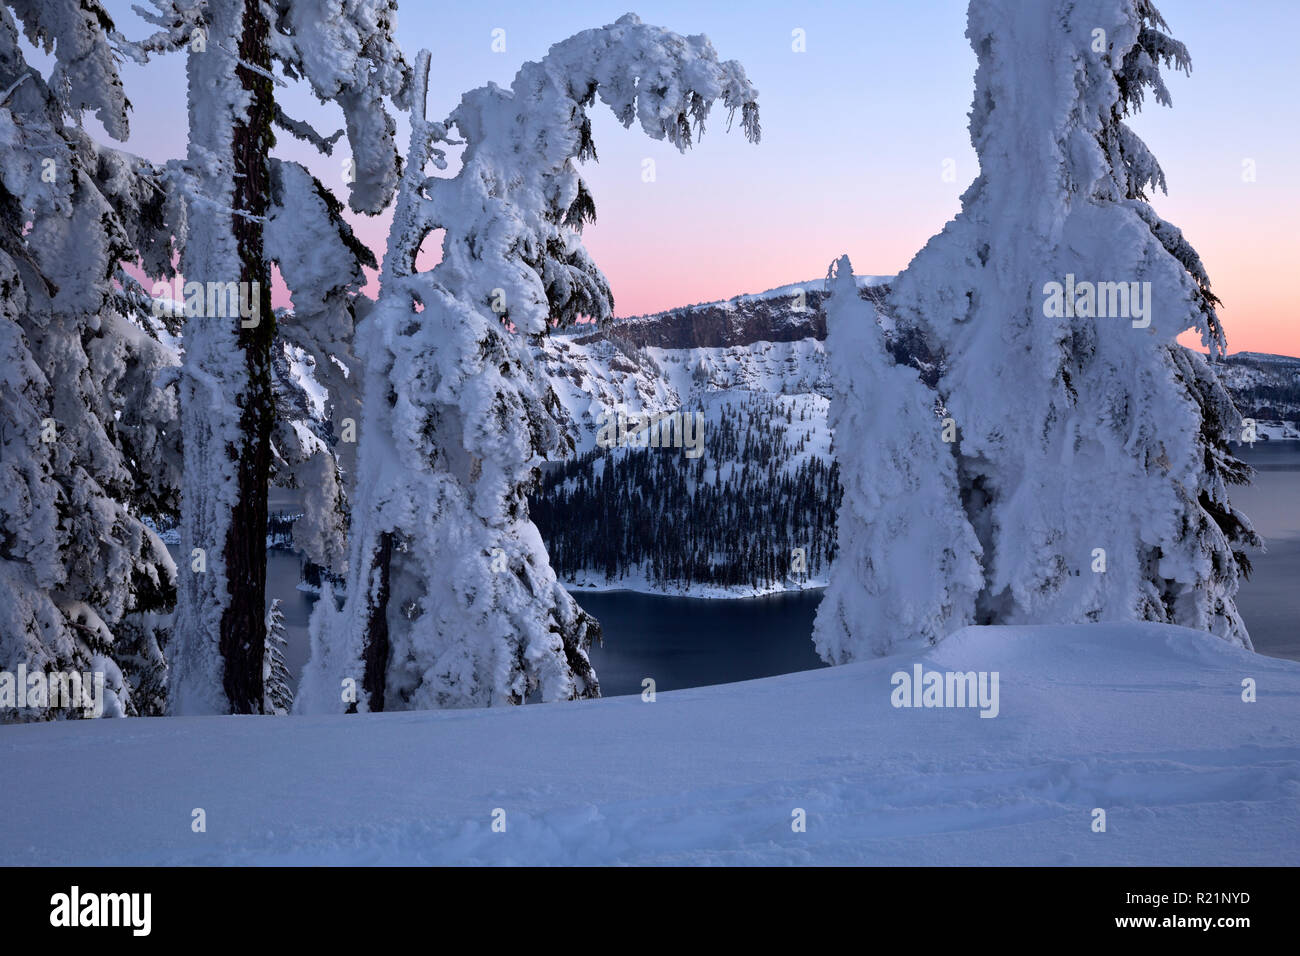 OR02417-00...OREGON - Trees covered with snow and ice overlooking Crater Lake, Wizard Island and Llao Rock beyond at dawn from the West Rim Road at Cr Stock Photo